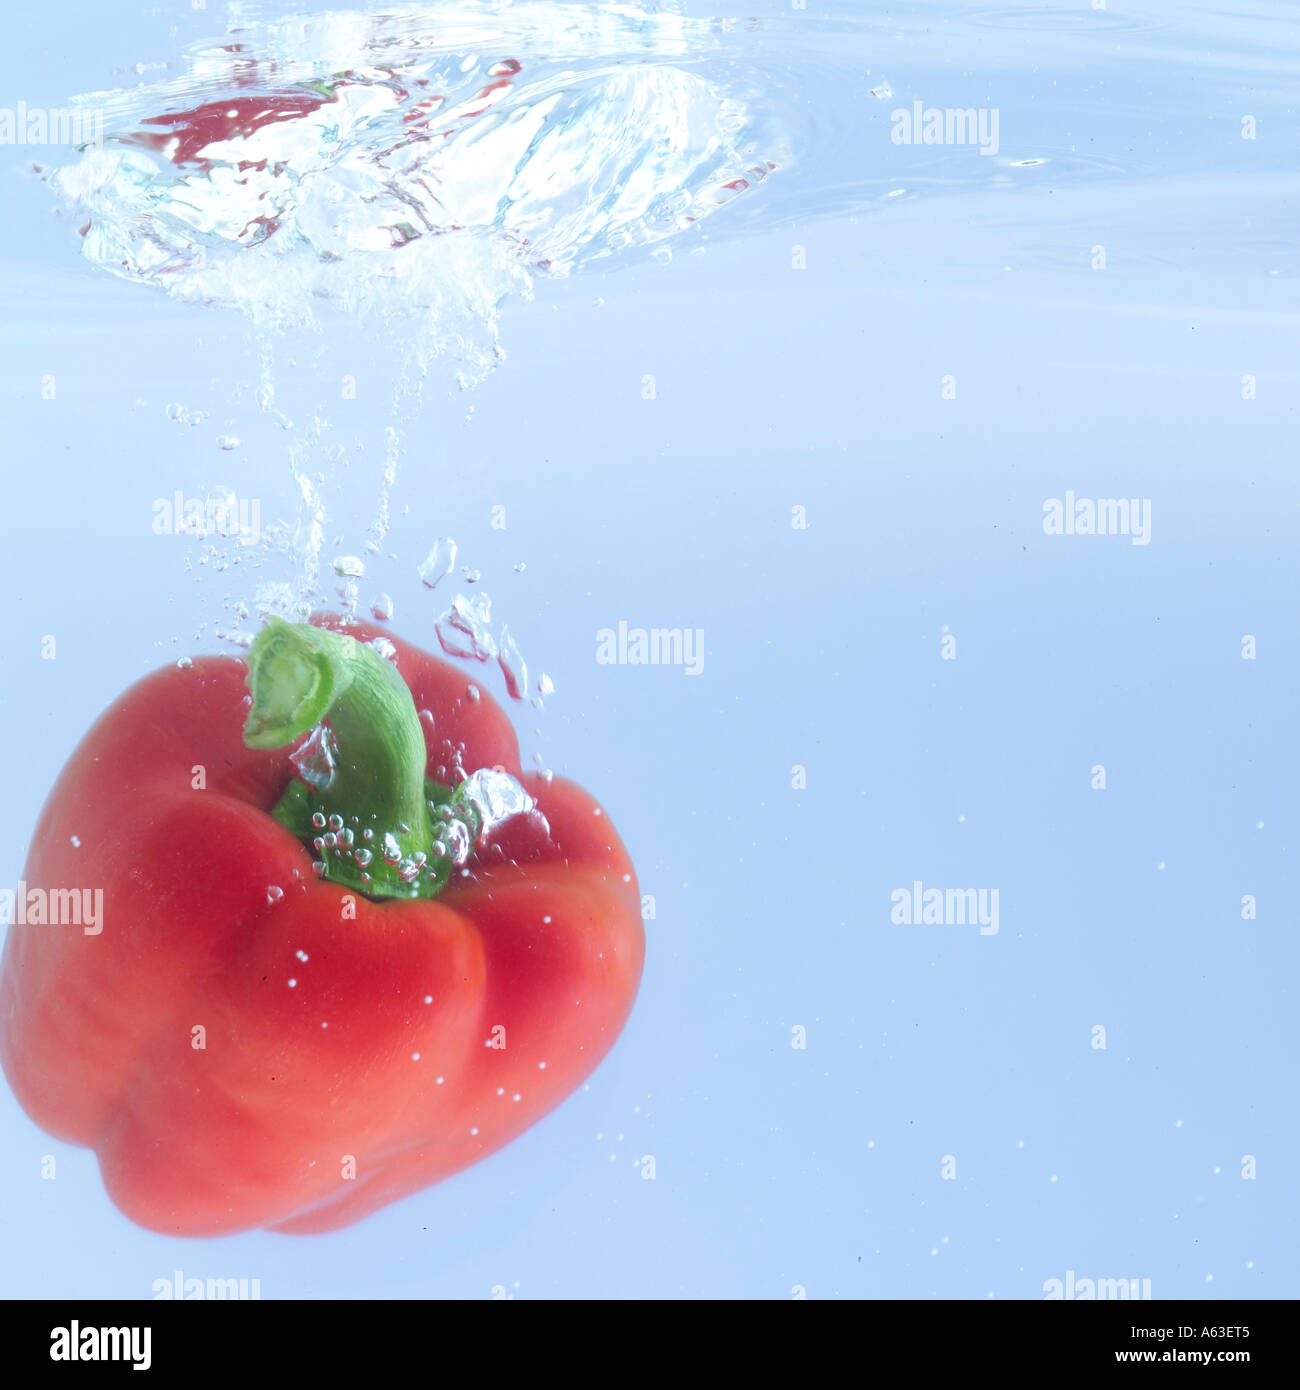 Close-up of red bell peppers splashing in water Stock Photo